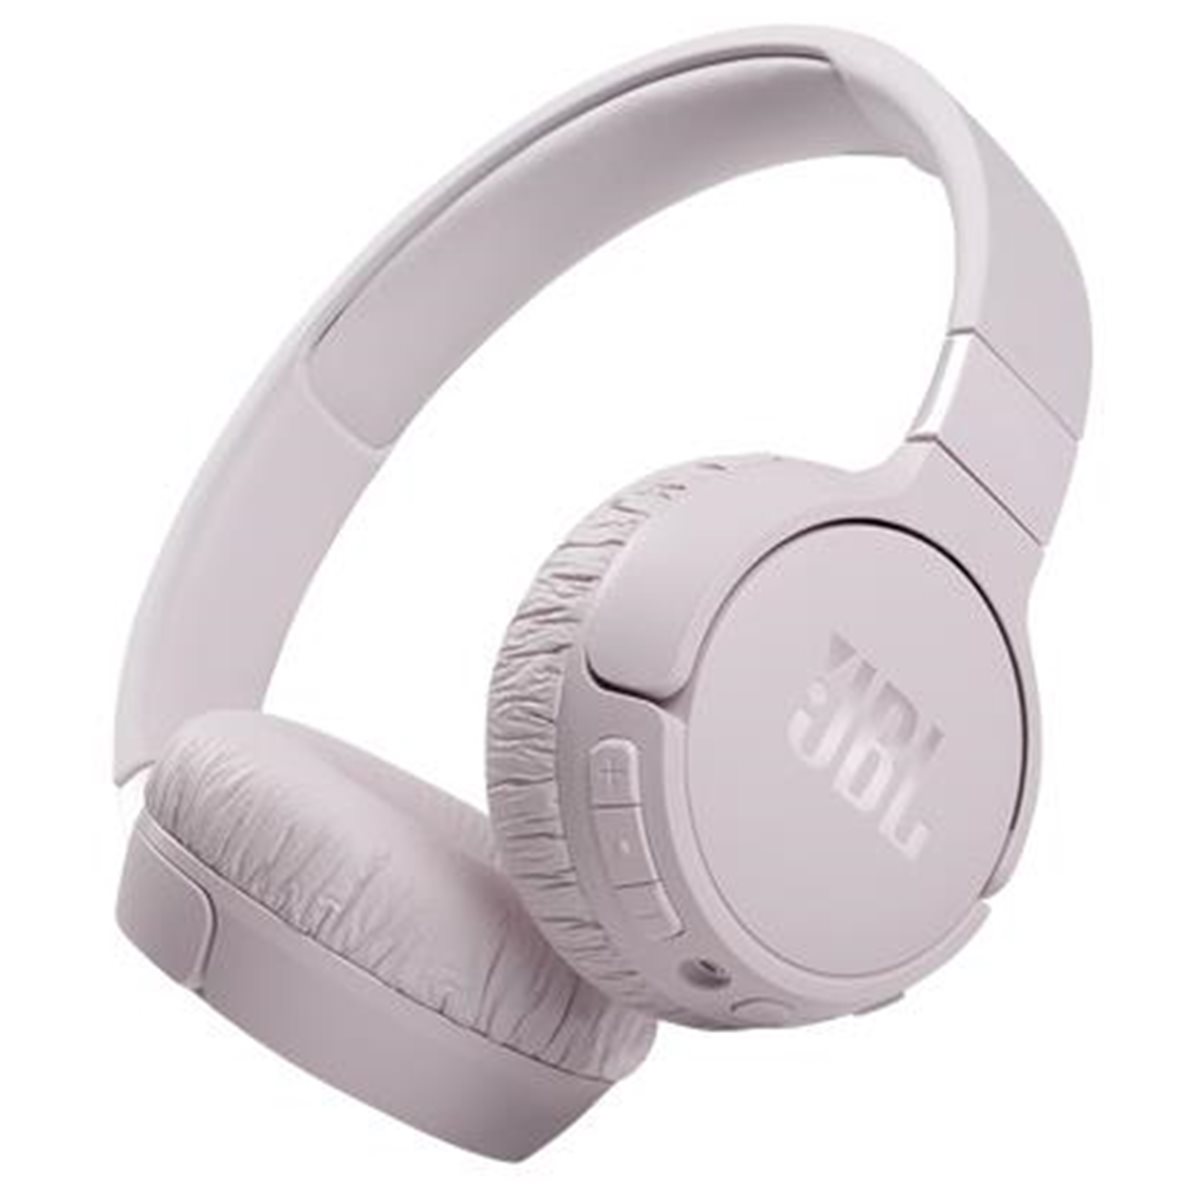 Cancelling, Smartphone - Headset Bluetooth Noice - : Tune controls JBL Switzerland - JBLT660NCPIK accessories pink JBLT660NCPIK | - stereo MOBX.CH OnEarcup 660NC